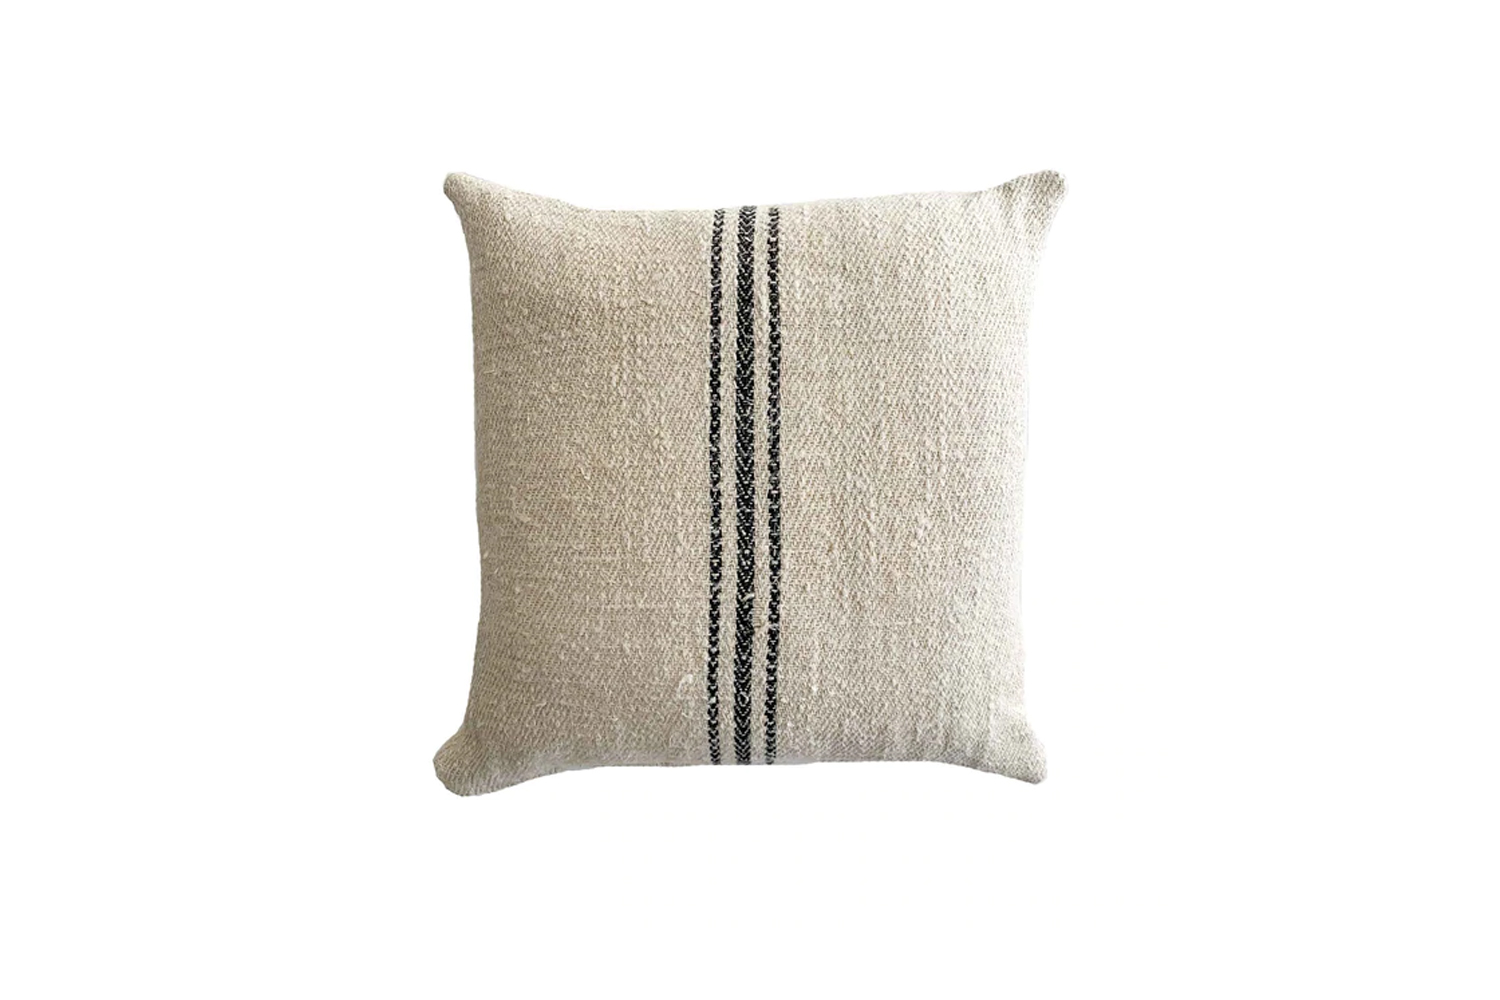 antique grain sack pillows with timeless character are \$\10\2 from studio pill 18